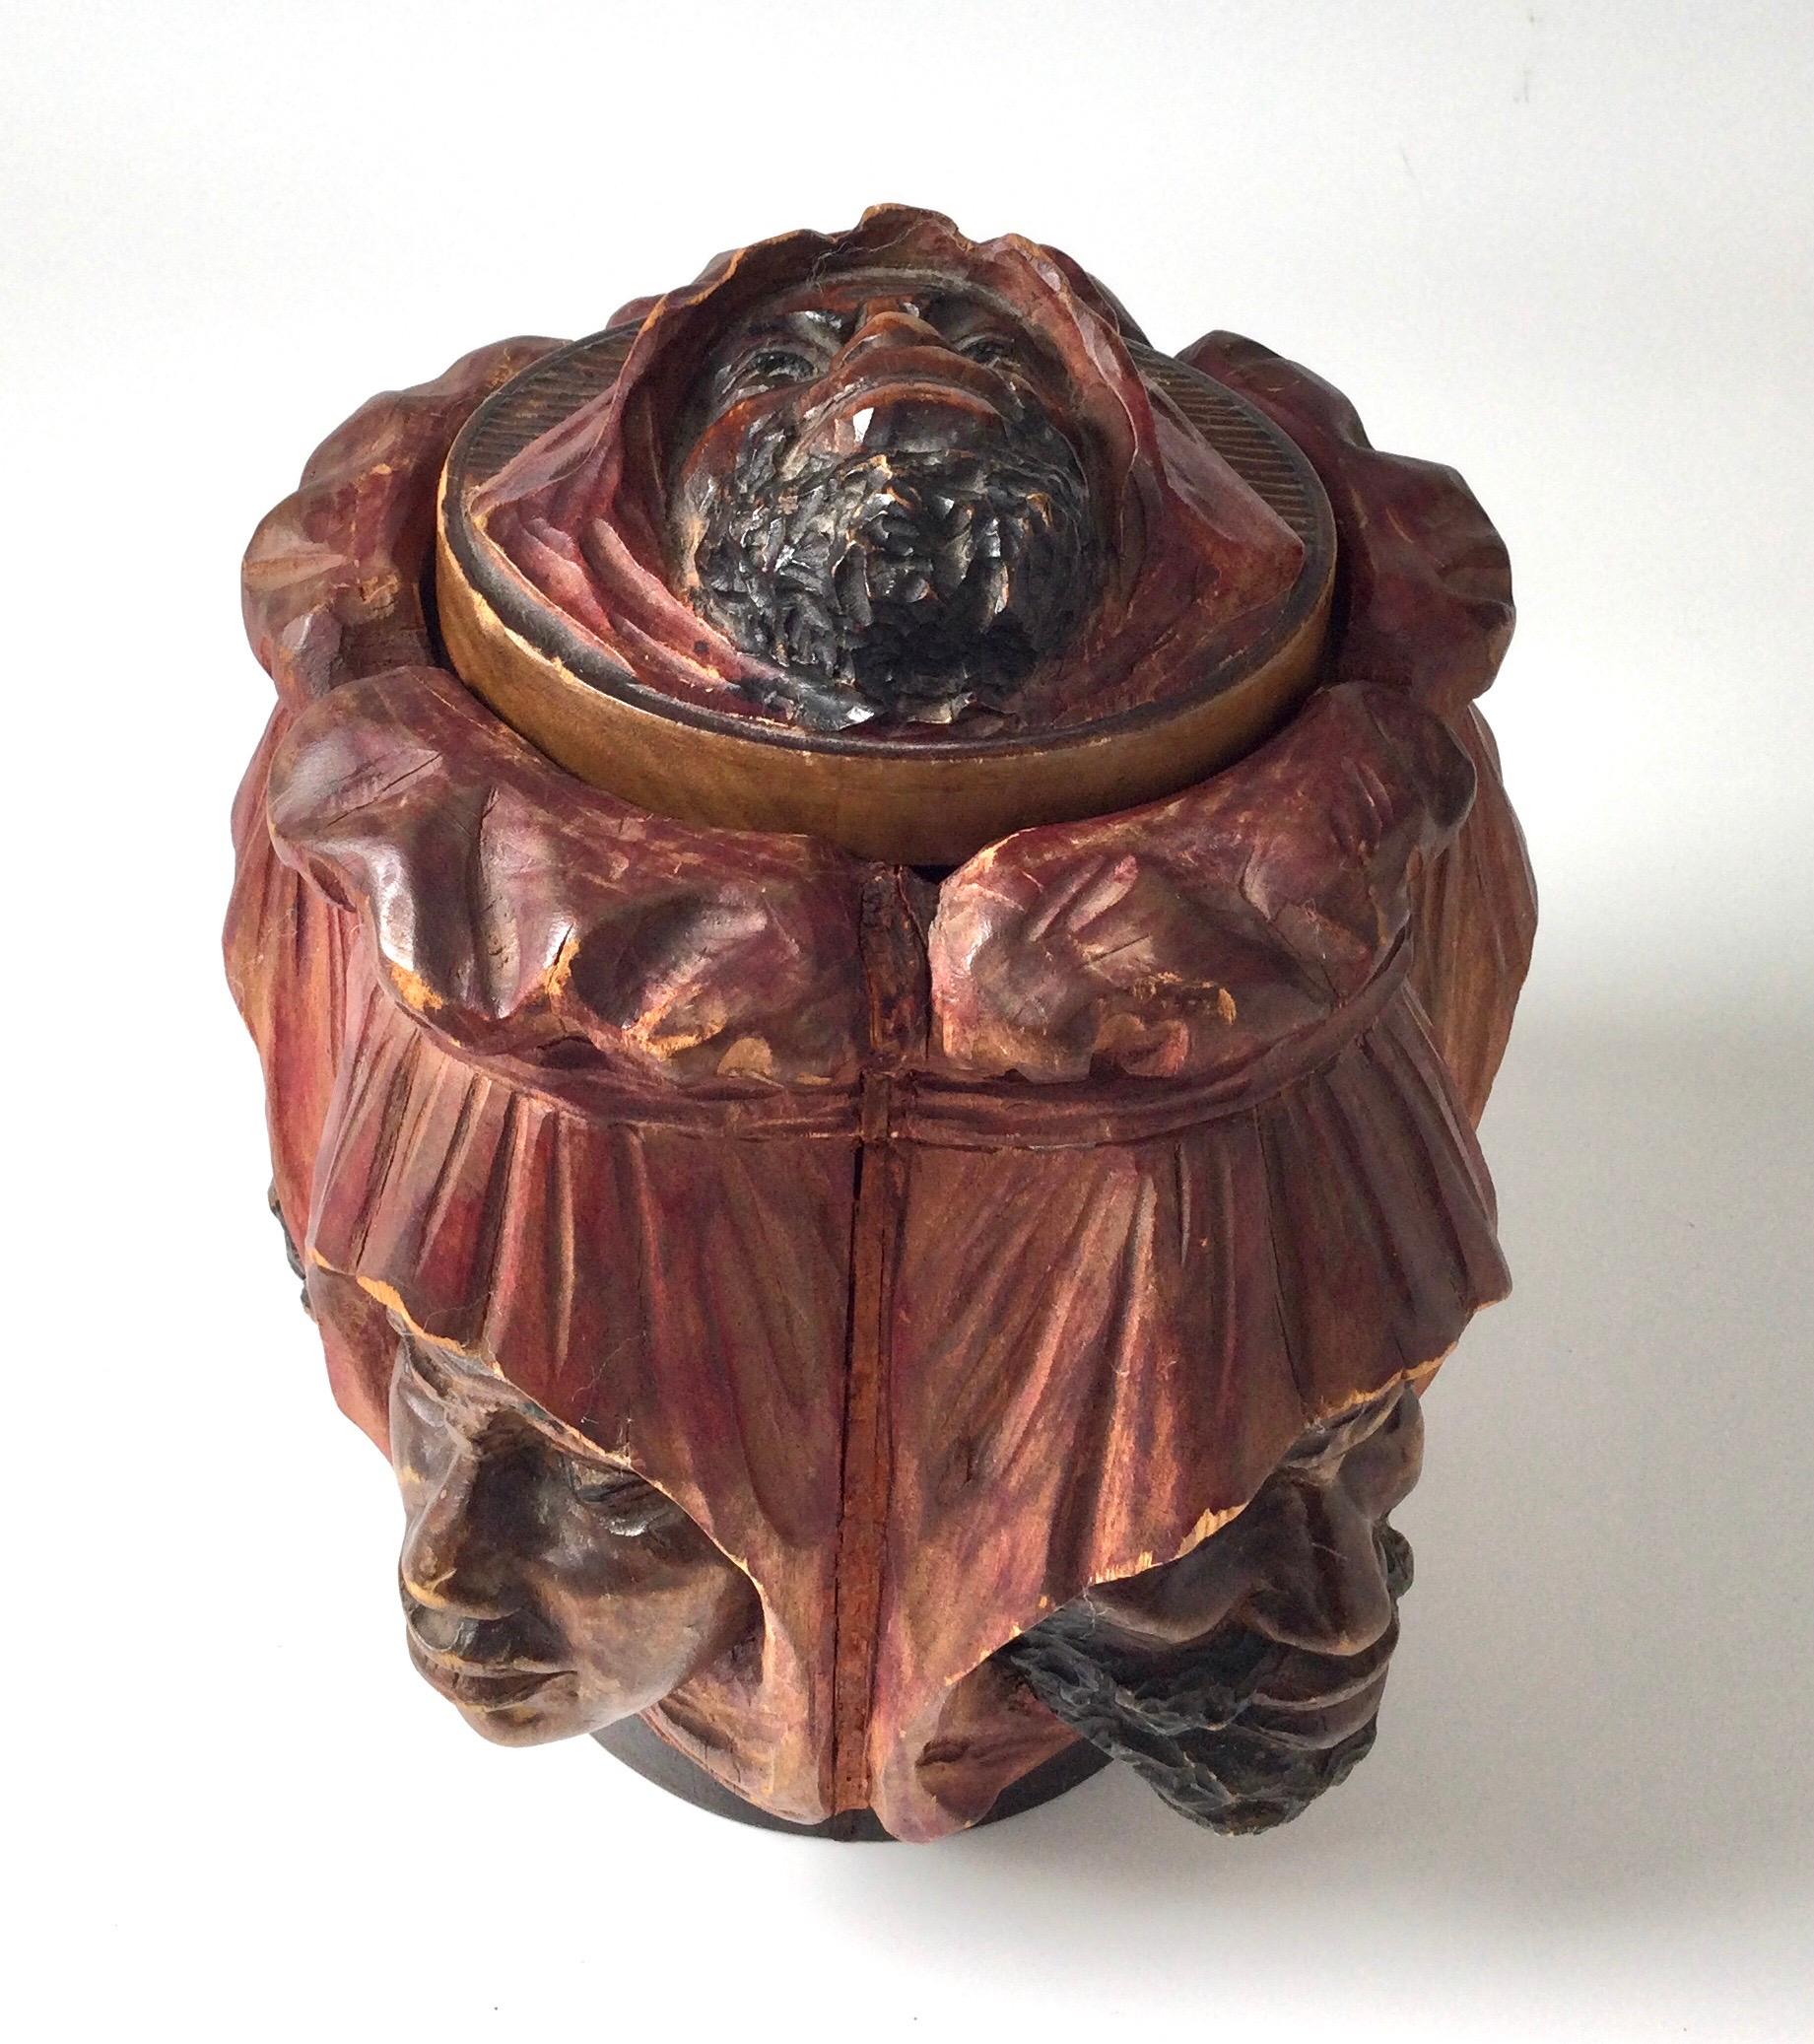 Unusual Hand Carved Hardwood and Polychromed Humidor With Six Nomadic Figures
An early 20th century hand carved humidor with lid. The top and body with detailed faces of nomadic men. The main color is a deep burgundy red with hand painted scarves on